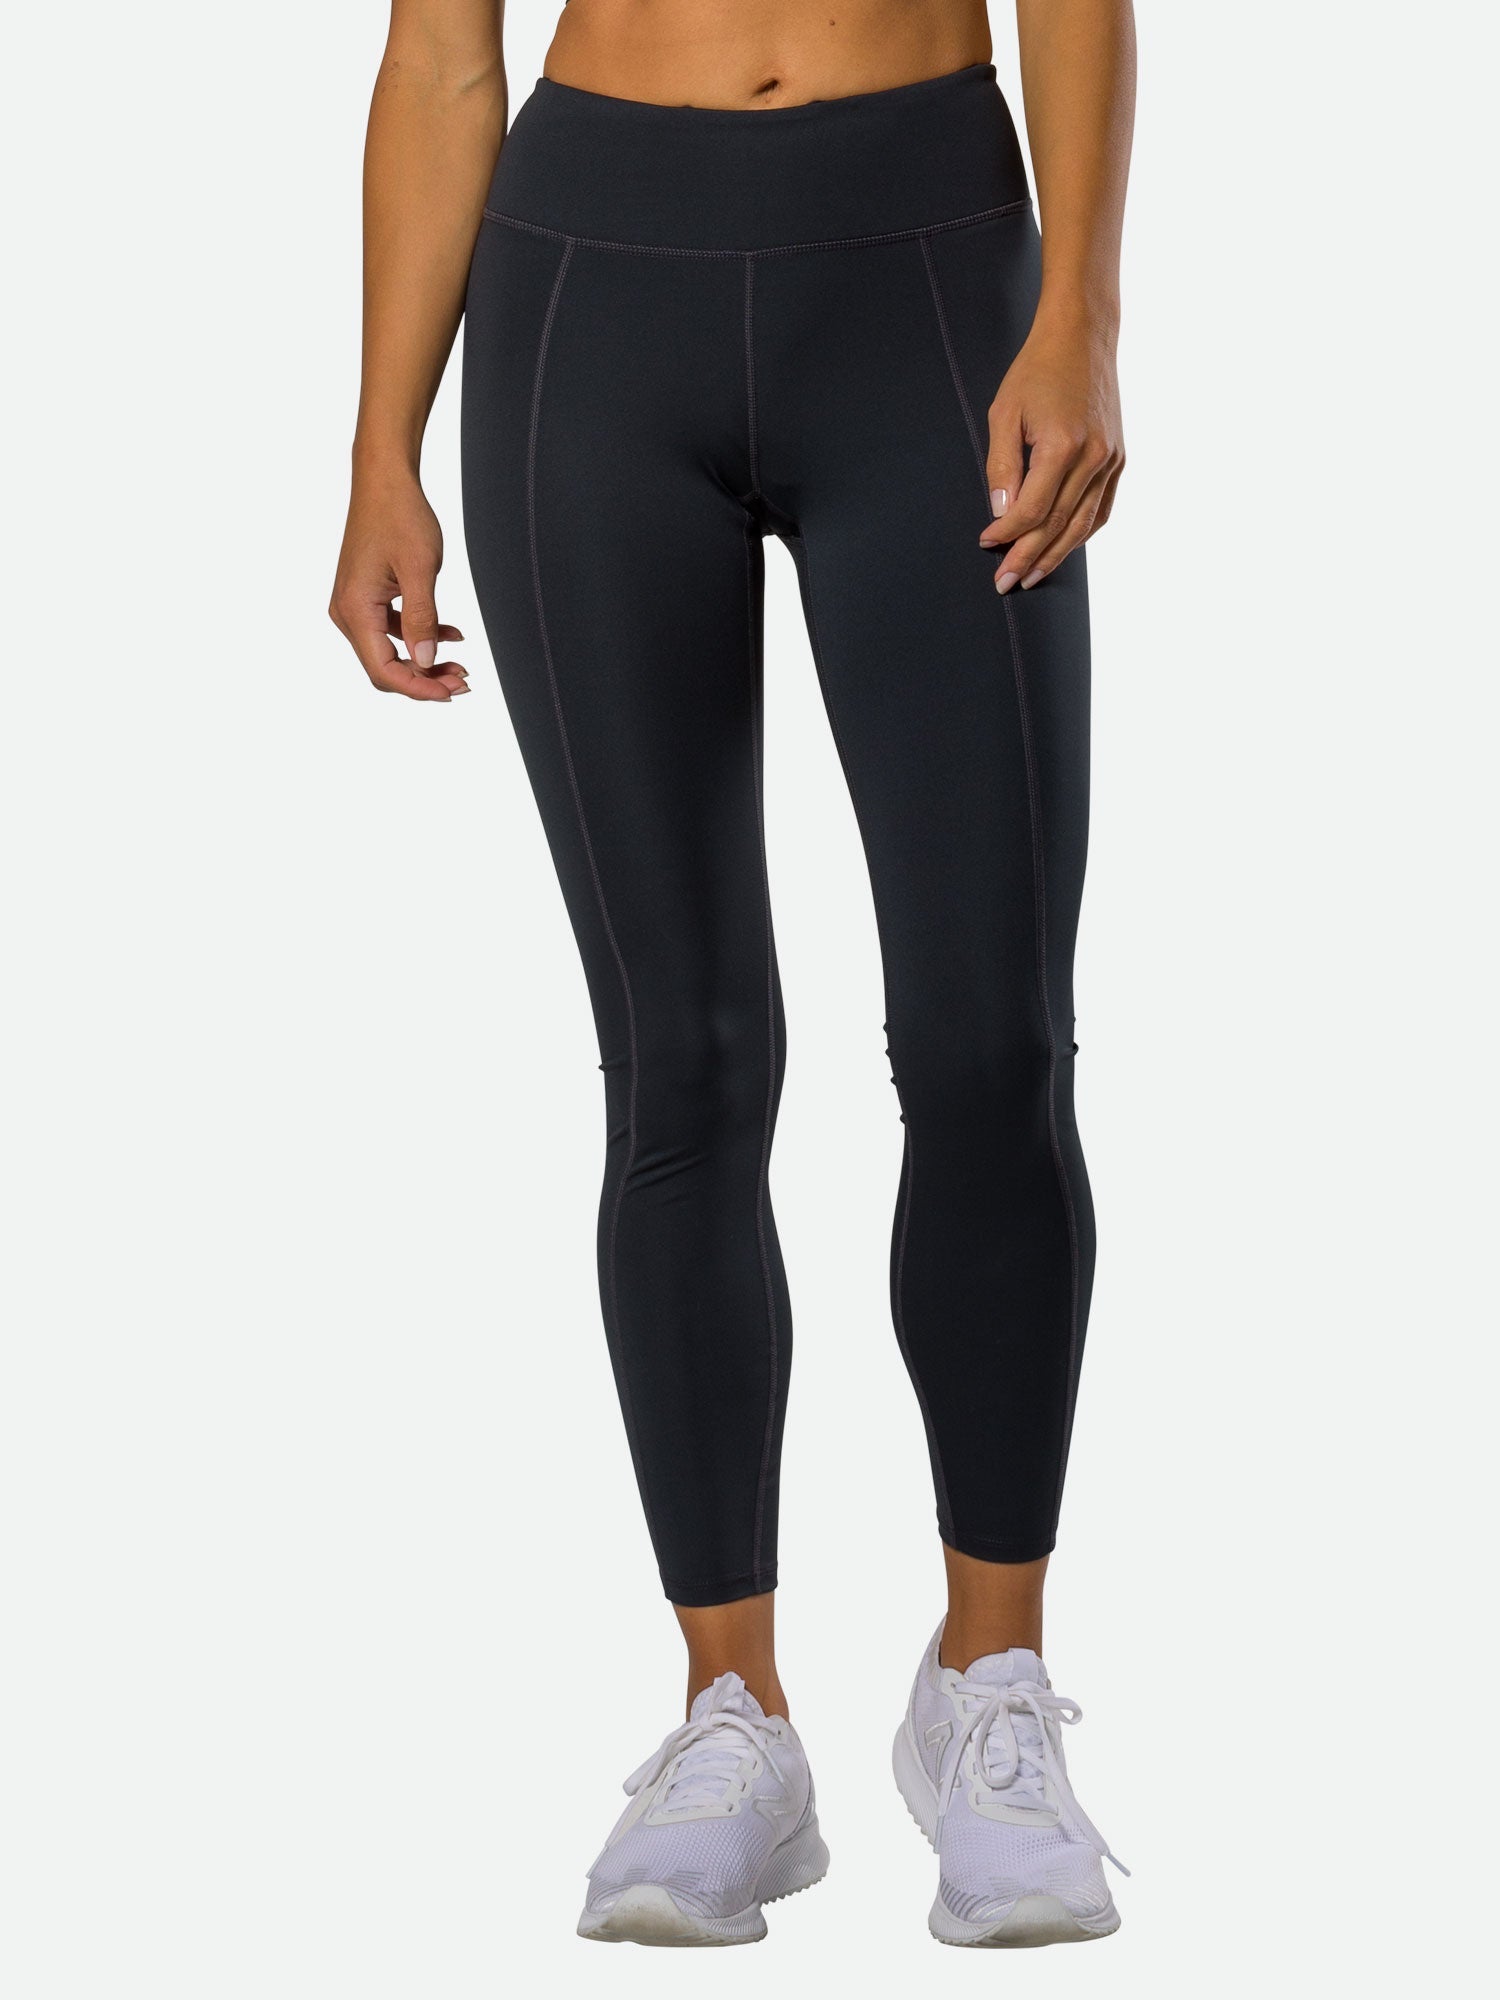 Moment 8 inch Women's Running Tights